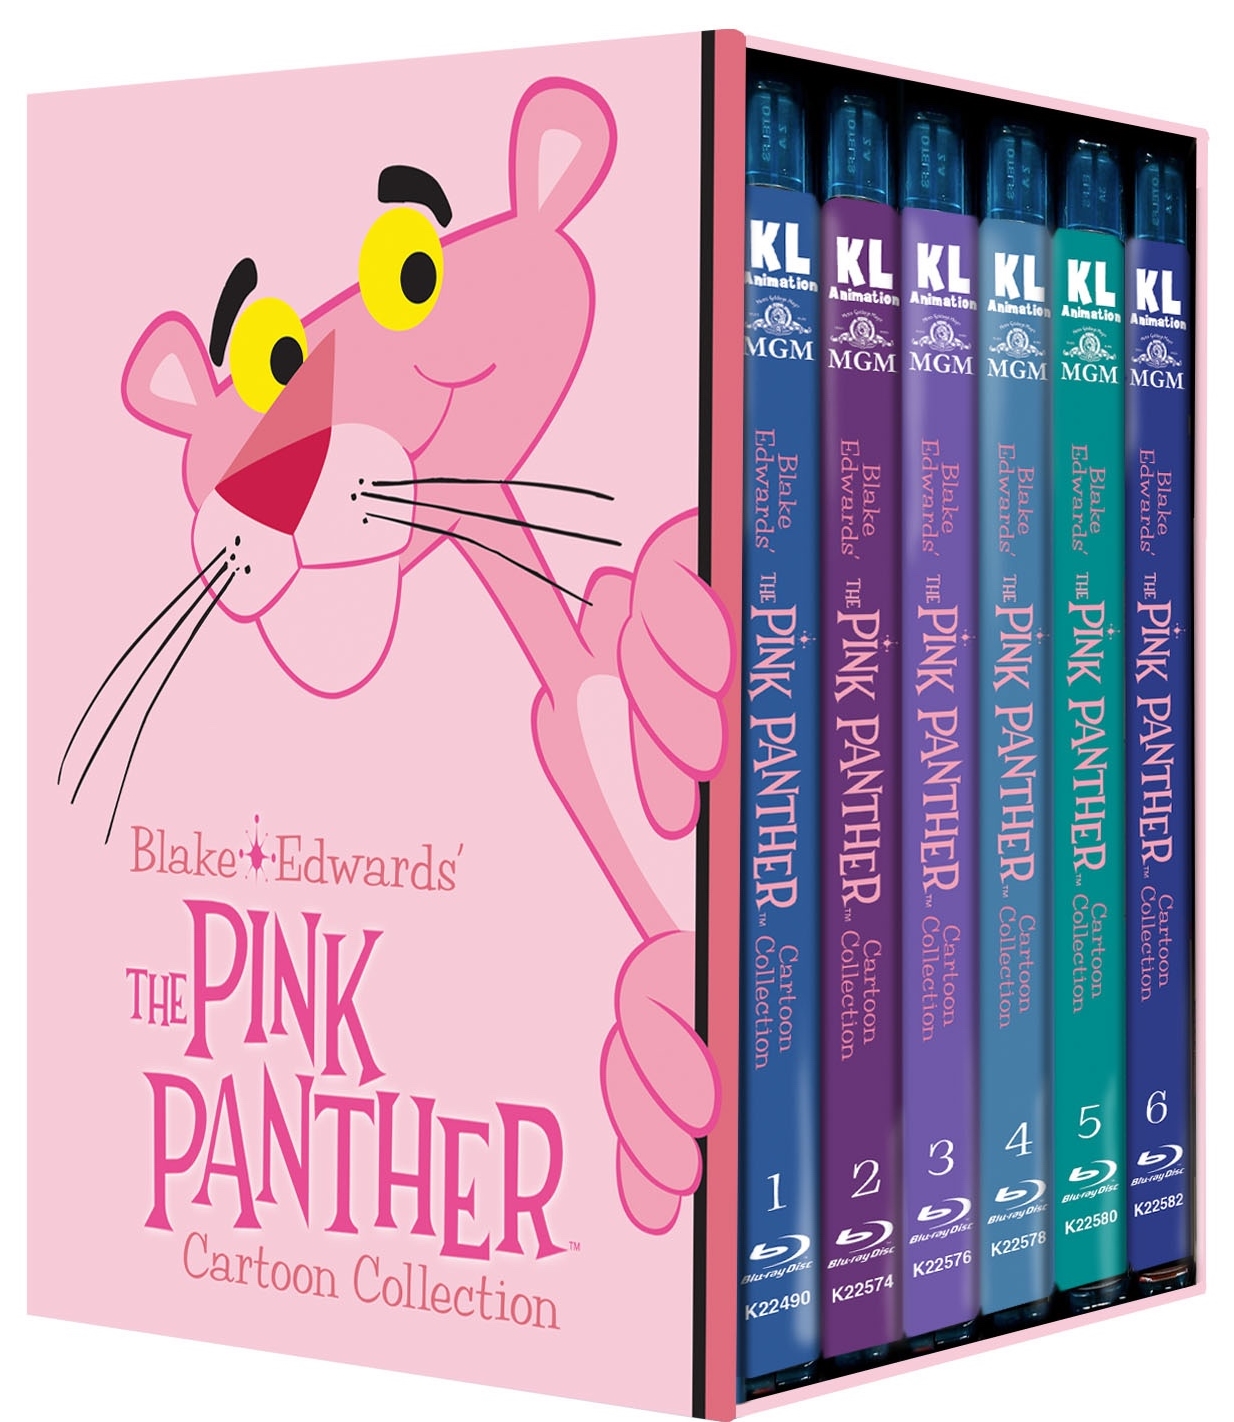 The Pink Panther Classic Cartoon DVDs and Blu-rays